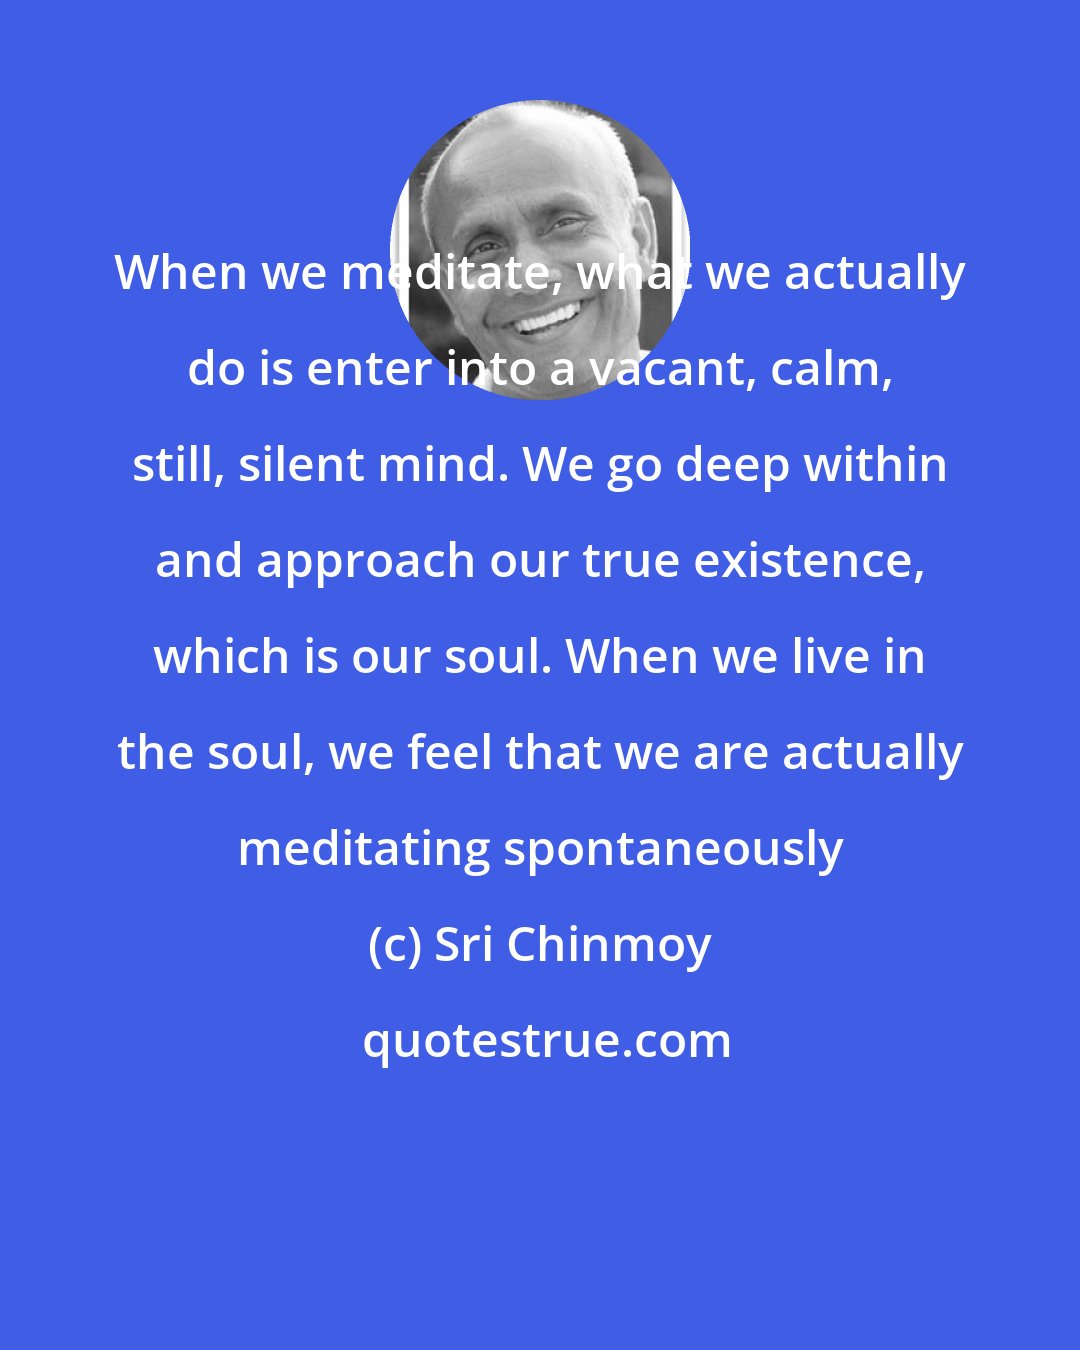 Sri Chinmoy: When we meditate, what we actually do is enter into a vacant, calm, still, silent mind. We go deep within and approach our true existence, which is our soul. When we live in the soul, we feel that we are actually meditating spontaneously